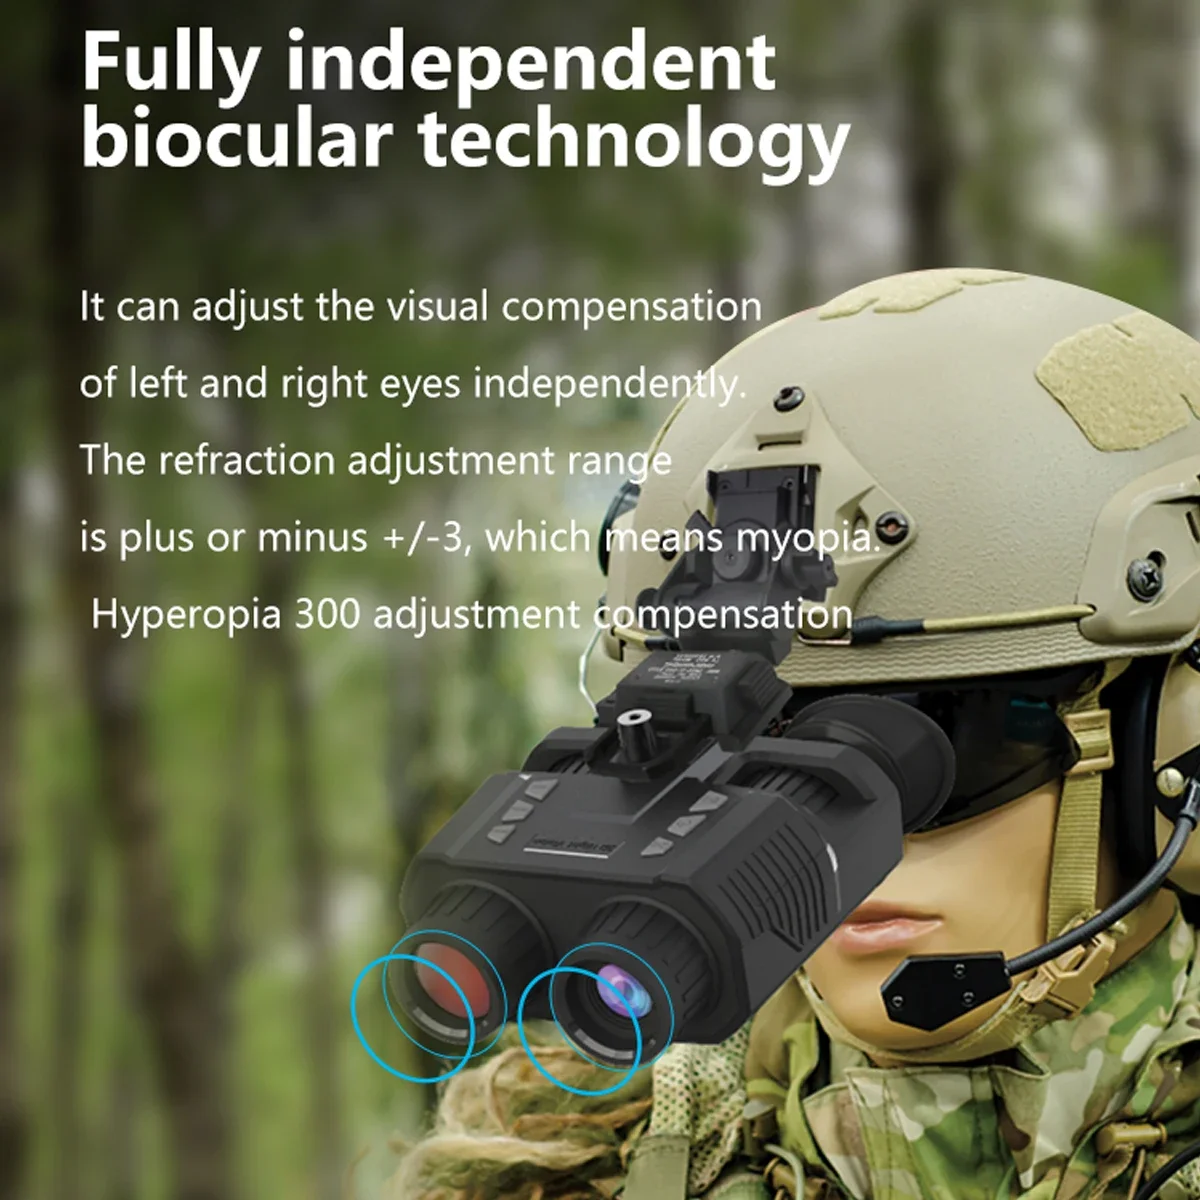 Head Mount Infrared Night Vision Device NV8000 Night Vision Binoculars Goggles 1080P HD Outdoor Hunting Camping Telescope helmet infrared night vision nv8000 head mount night vision binoculars goggles 1080p hd outdoor hunting camping telescope